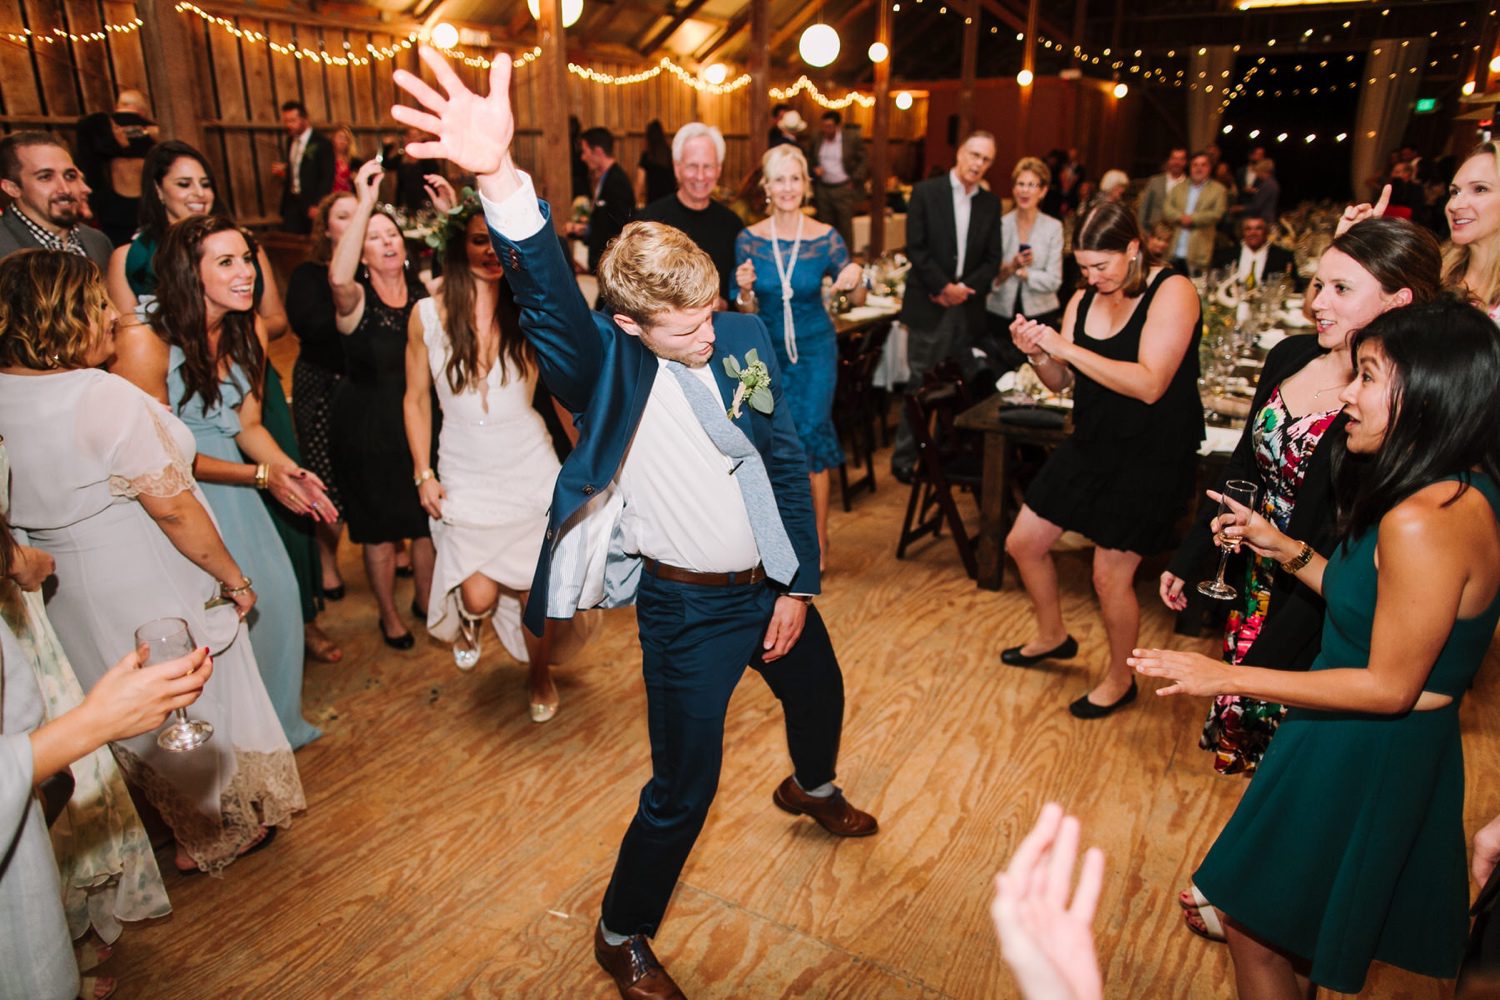 Groom surrounded by guests while he dances